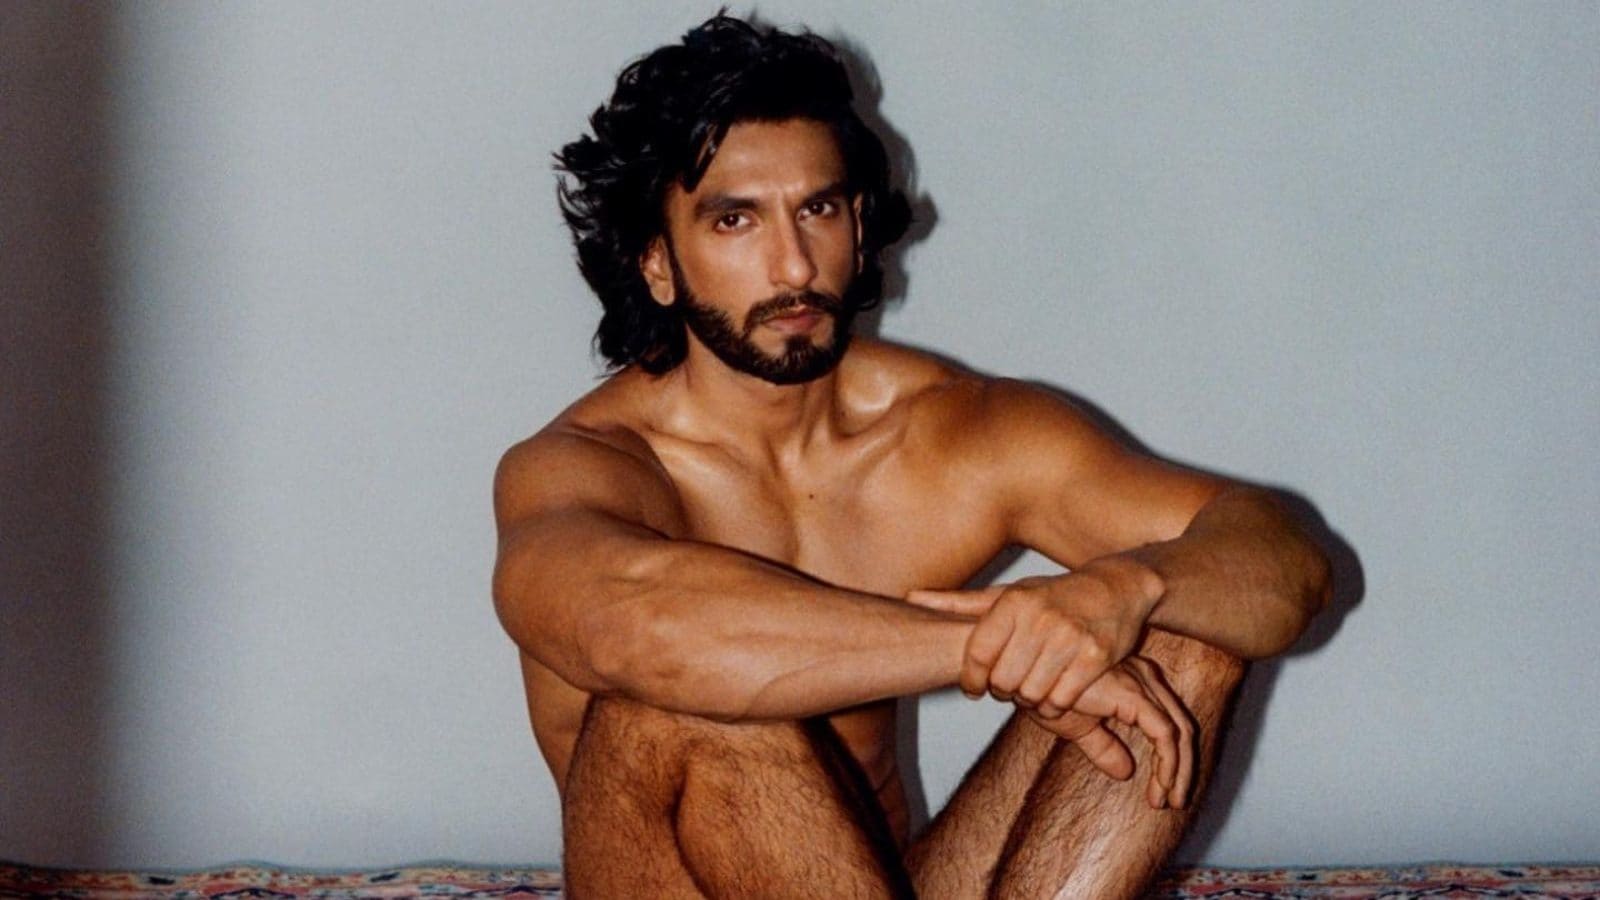 Nude World India - BuzzFix: Why Ranveer Singh's Masculinity Redefining Nude Shoot Does Not  Insult Women's Modesty